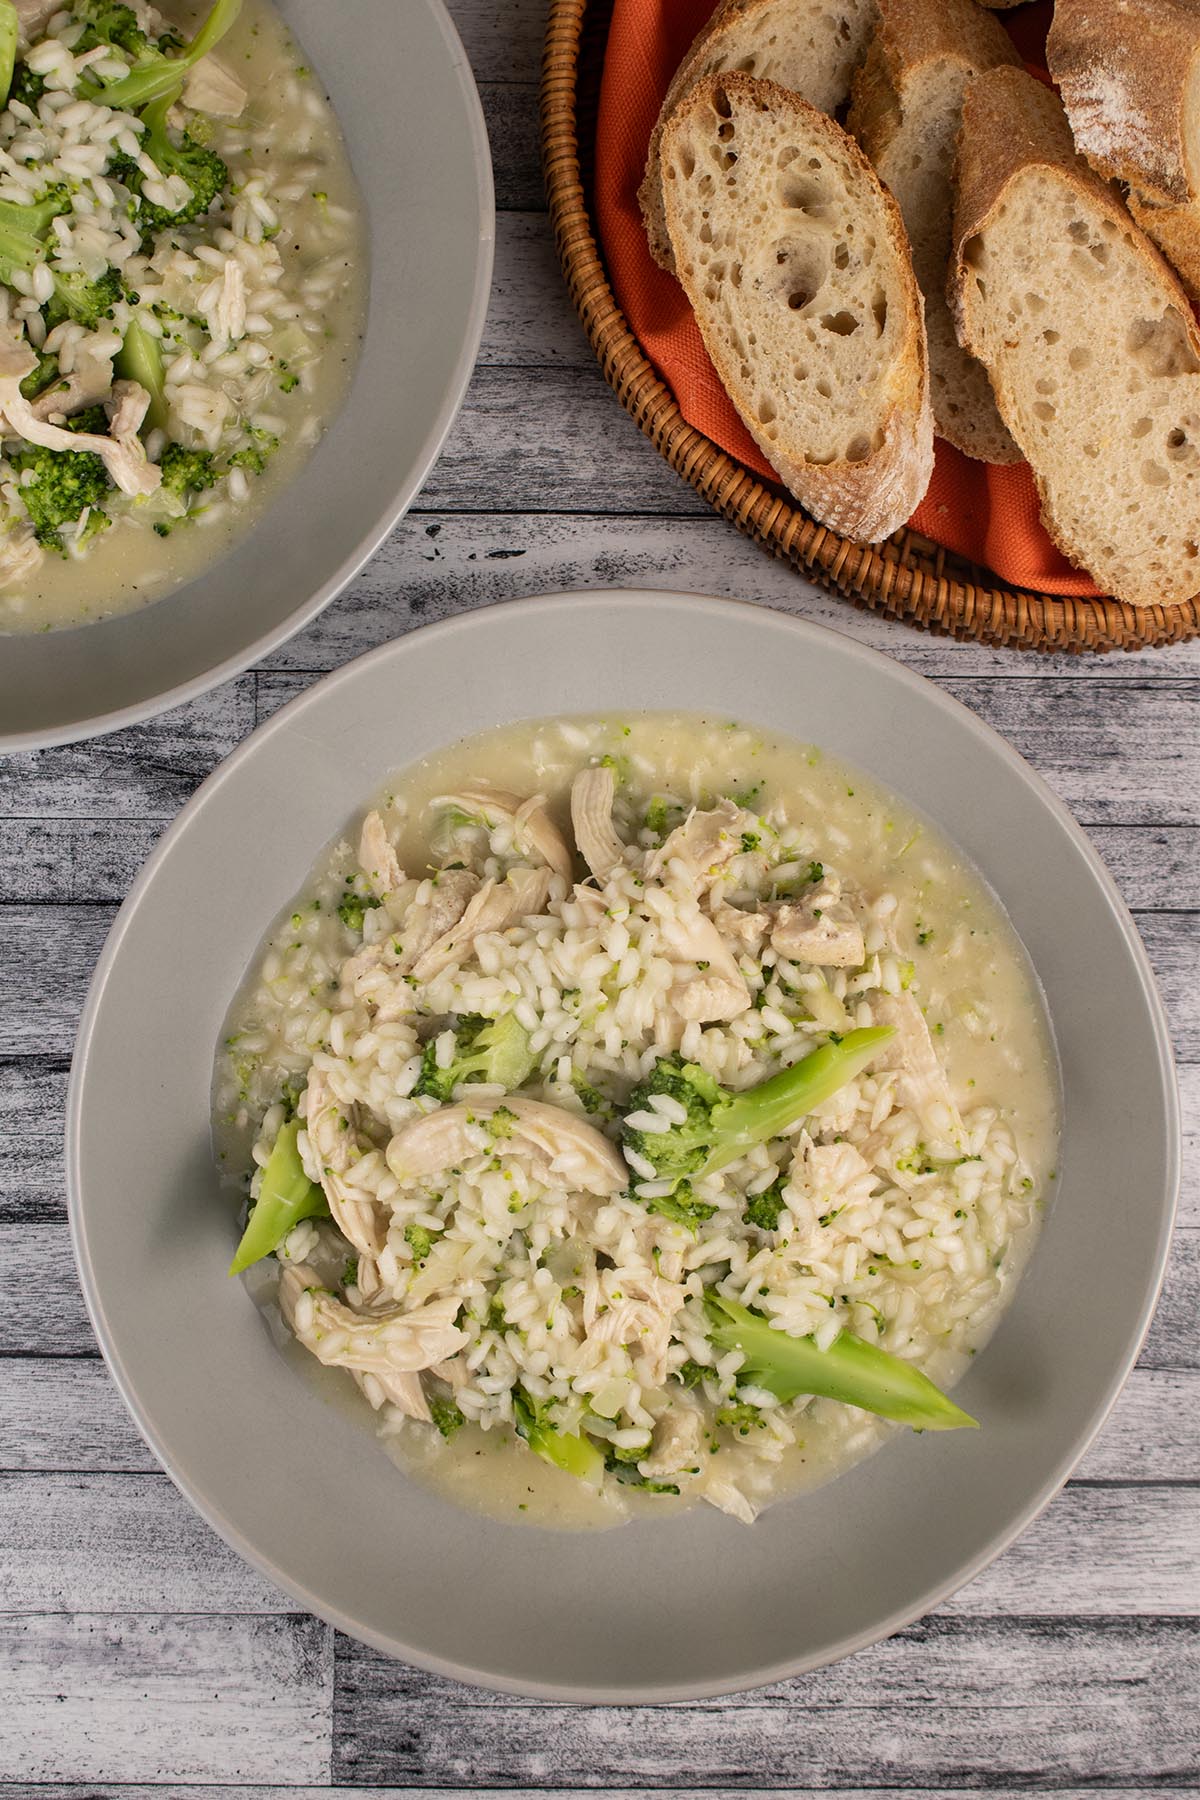 Chicken and broccoli risotto in a grey bowl and sliced baguette